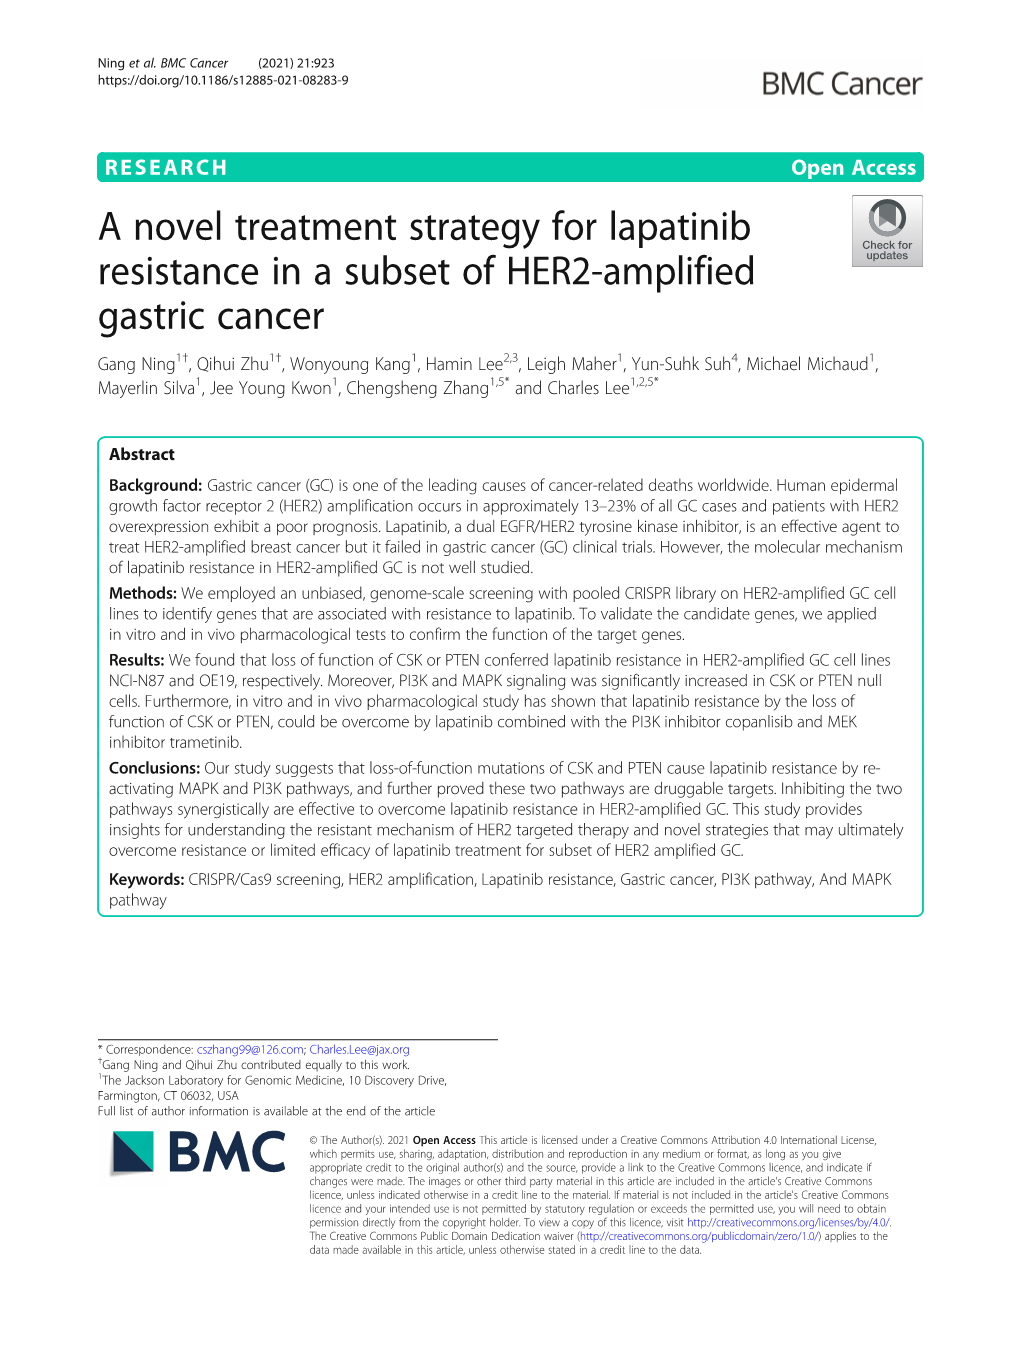 A Novel Treatment Strategy for Lapatinib Resistance in a Subset of HER2